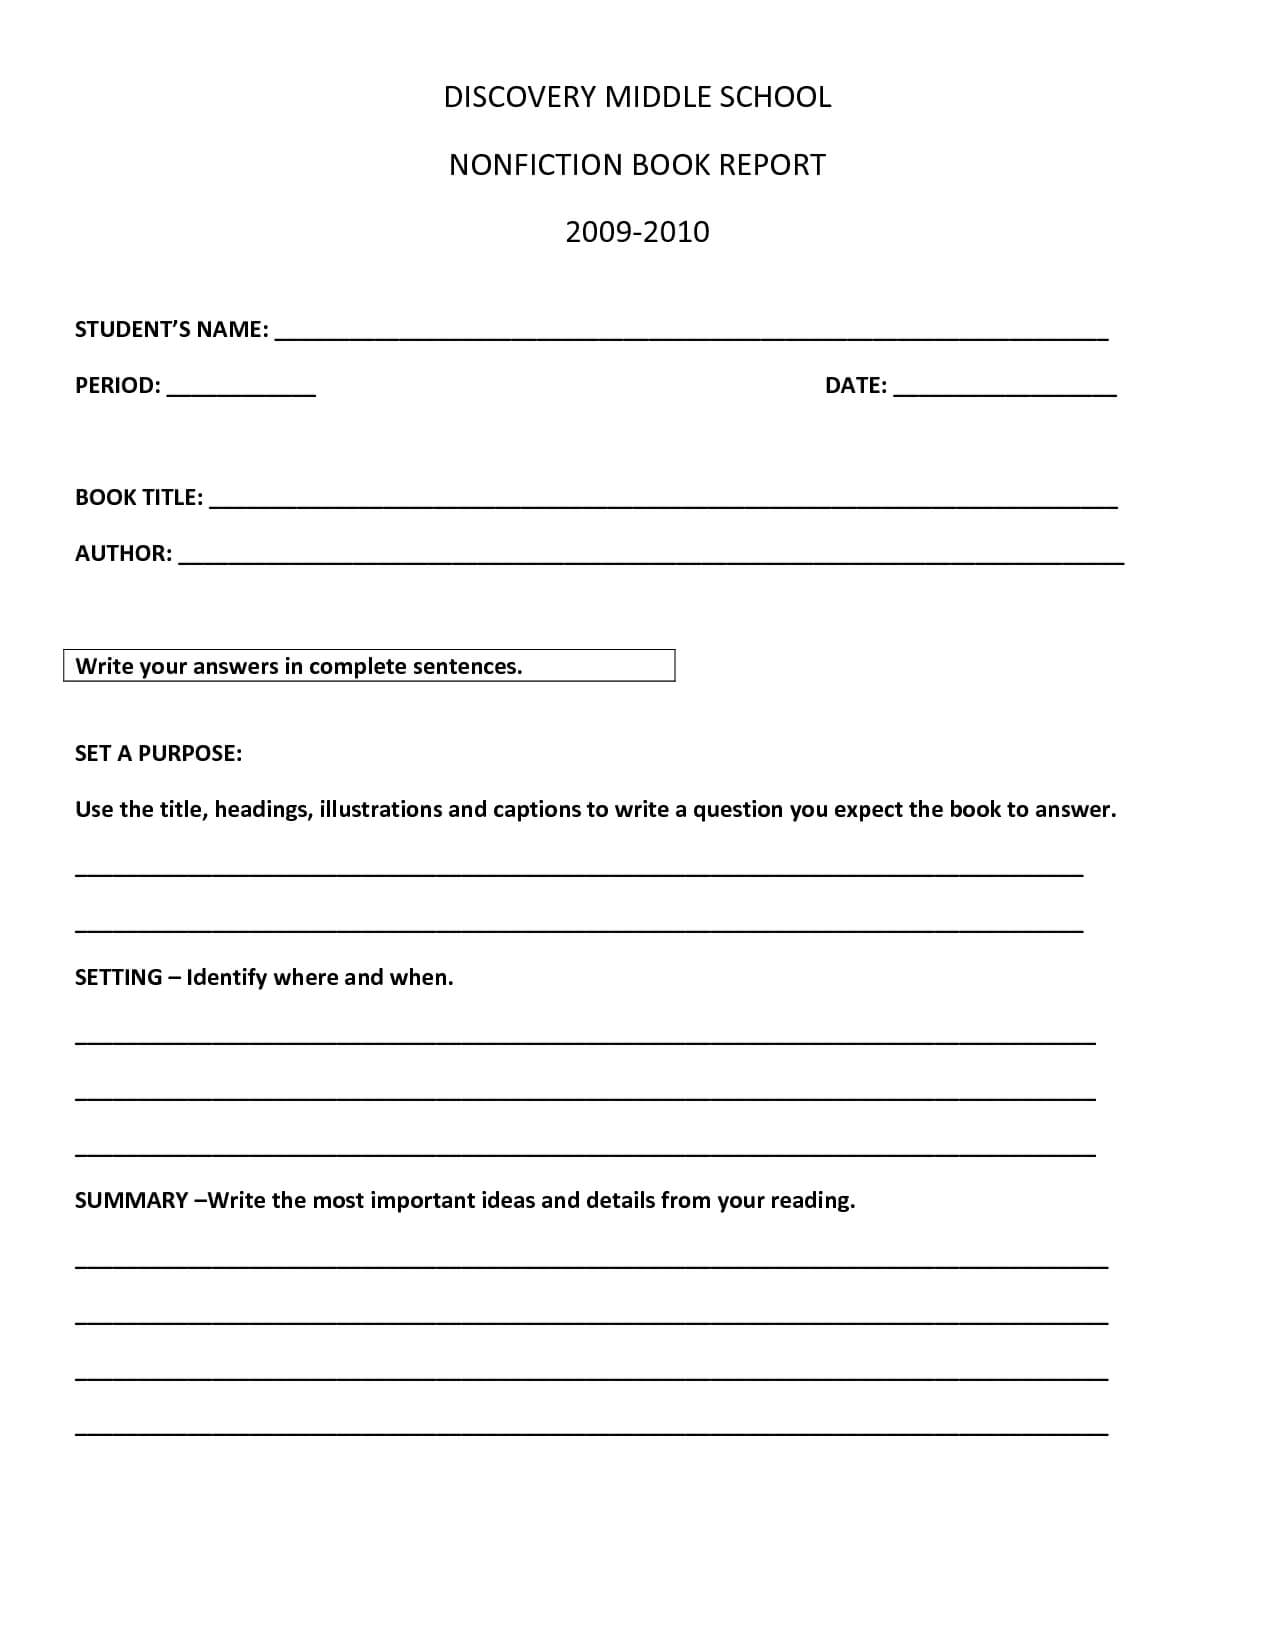 Book Report Template | Discovery Middle School Nonfiction For Book Report Template High School